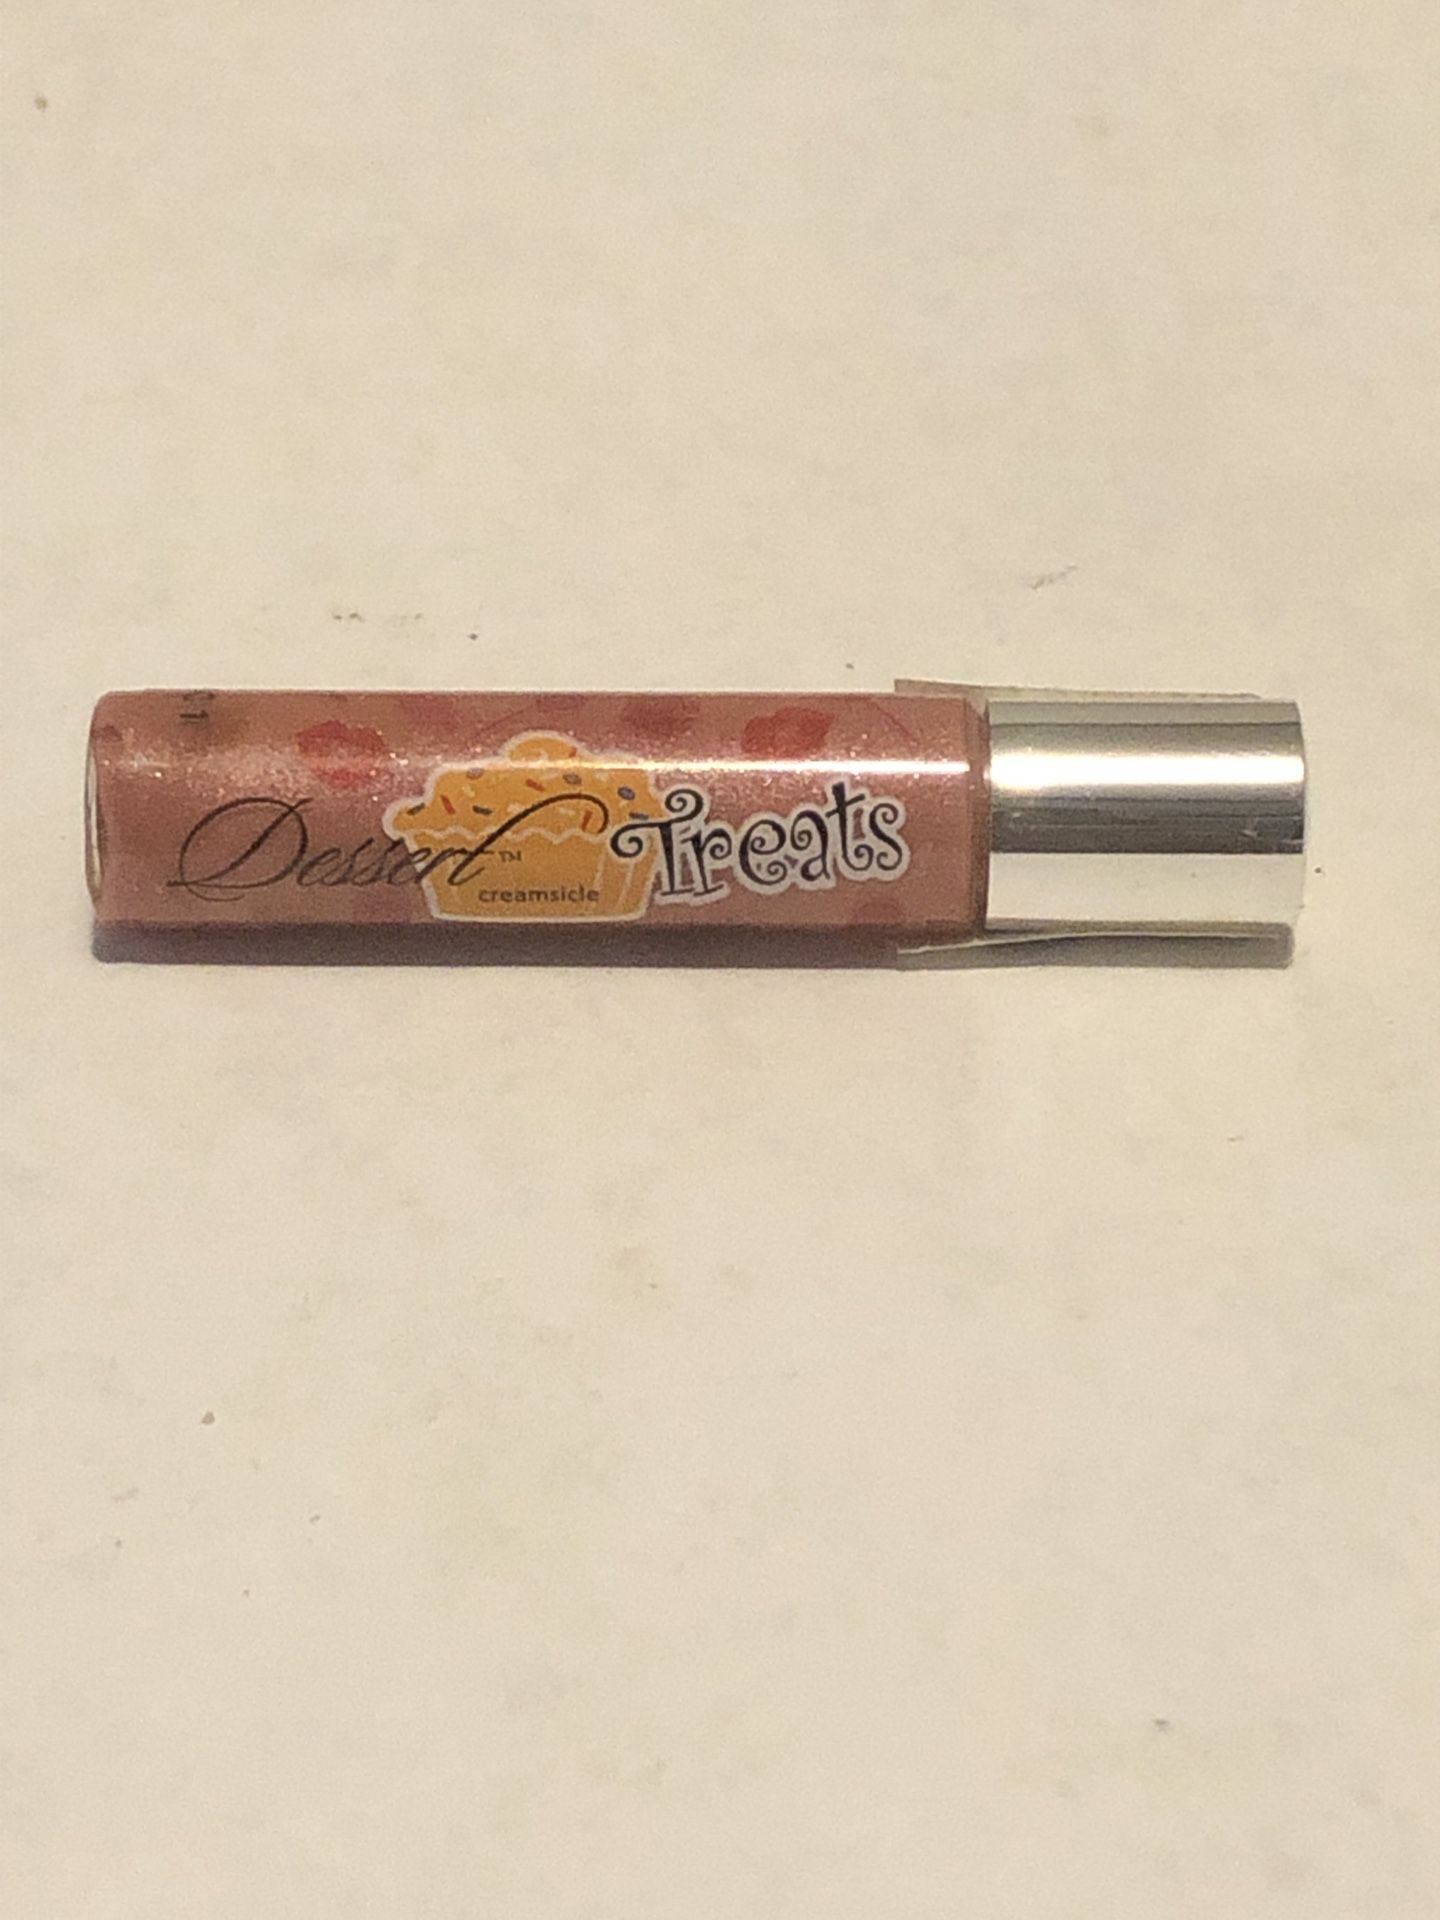 Jessica Simpson Dessert Treats Creamsicle Deliciously Plumping Lip Candy